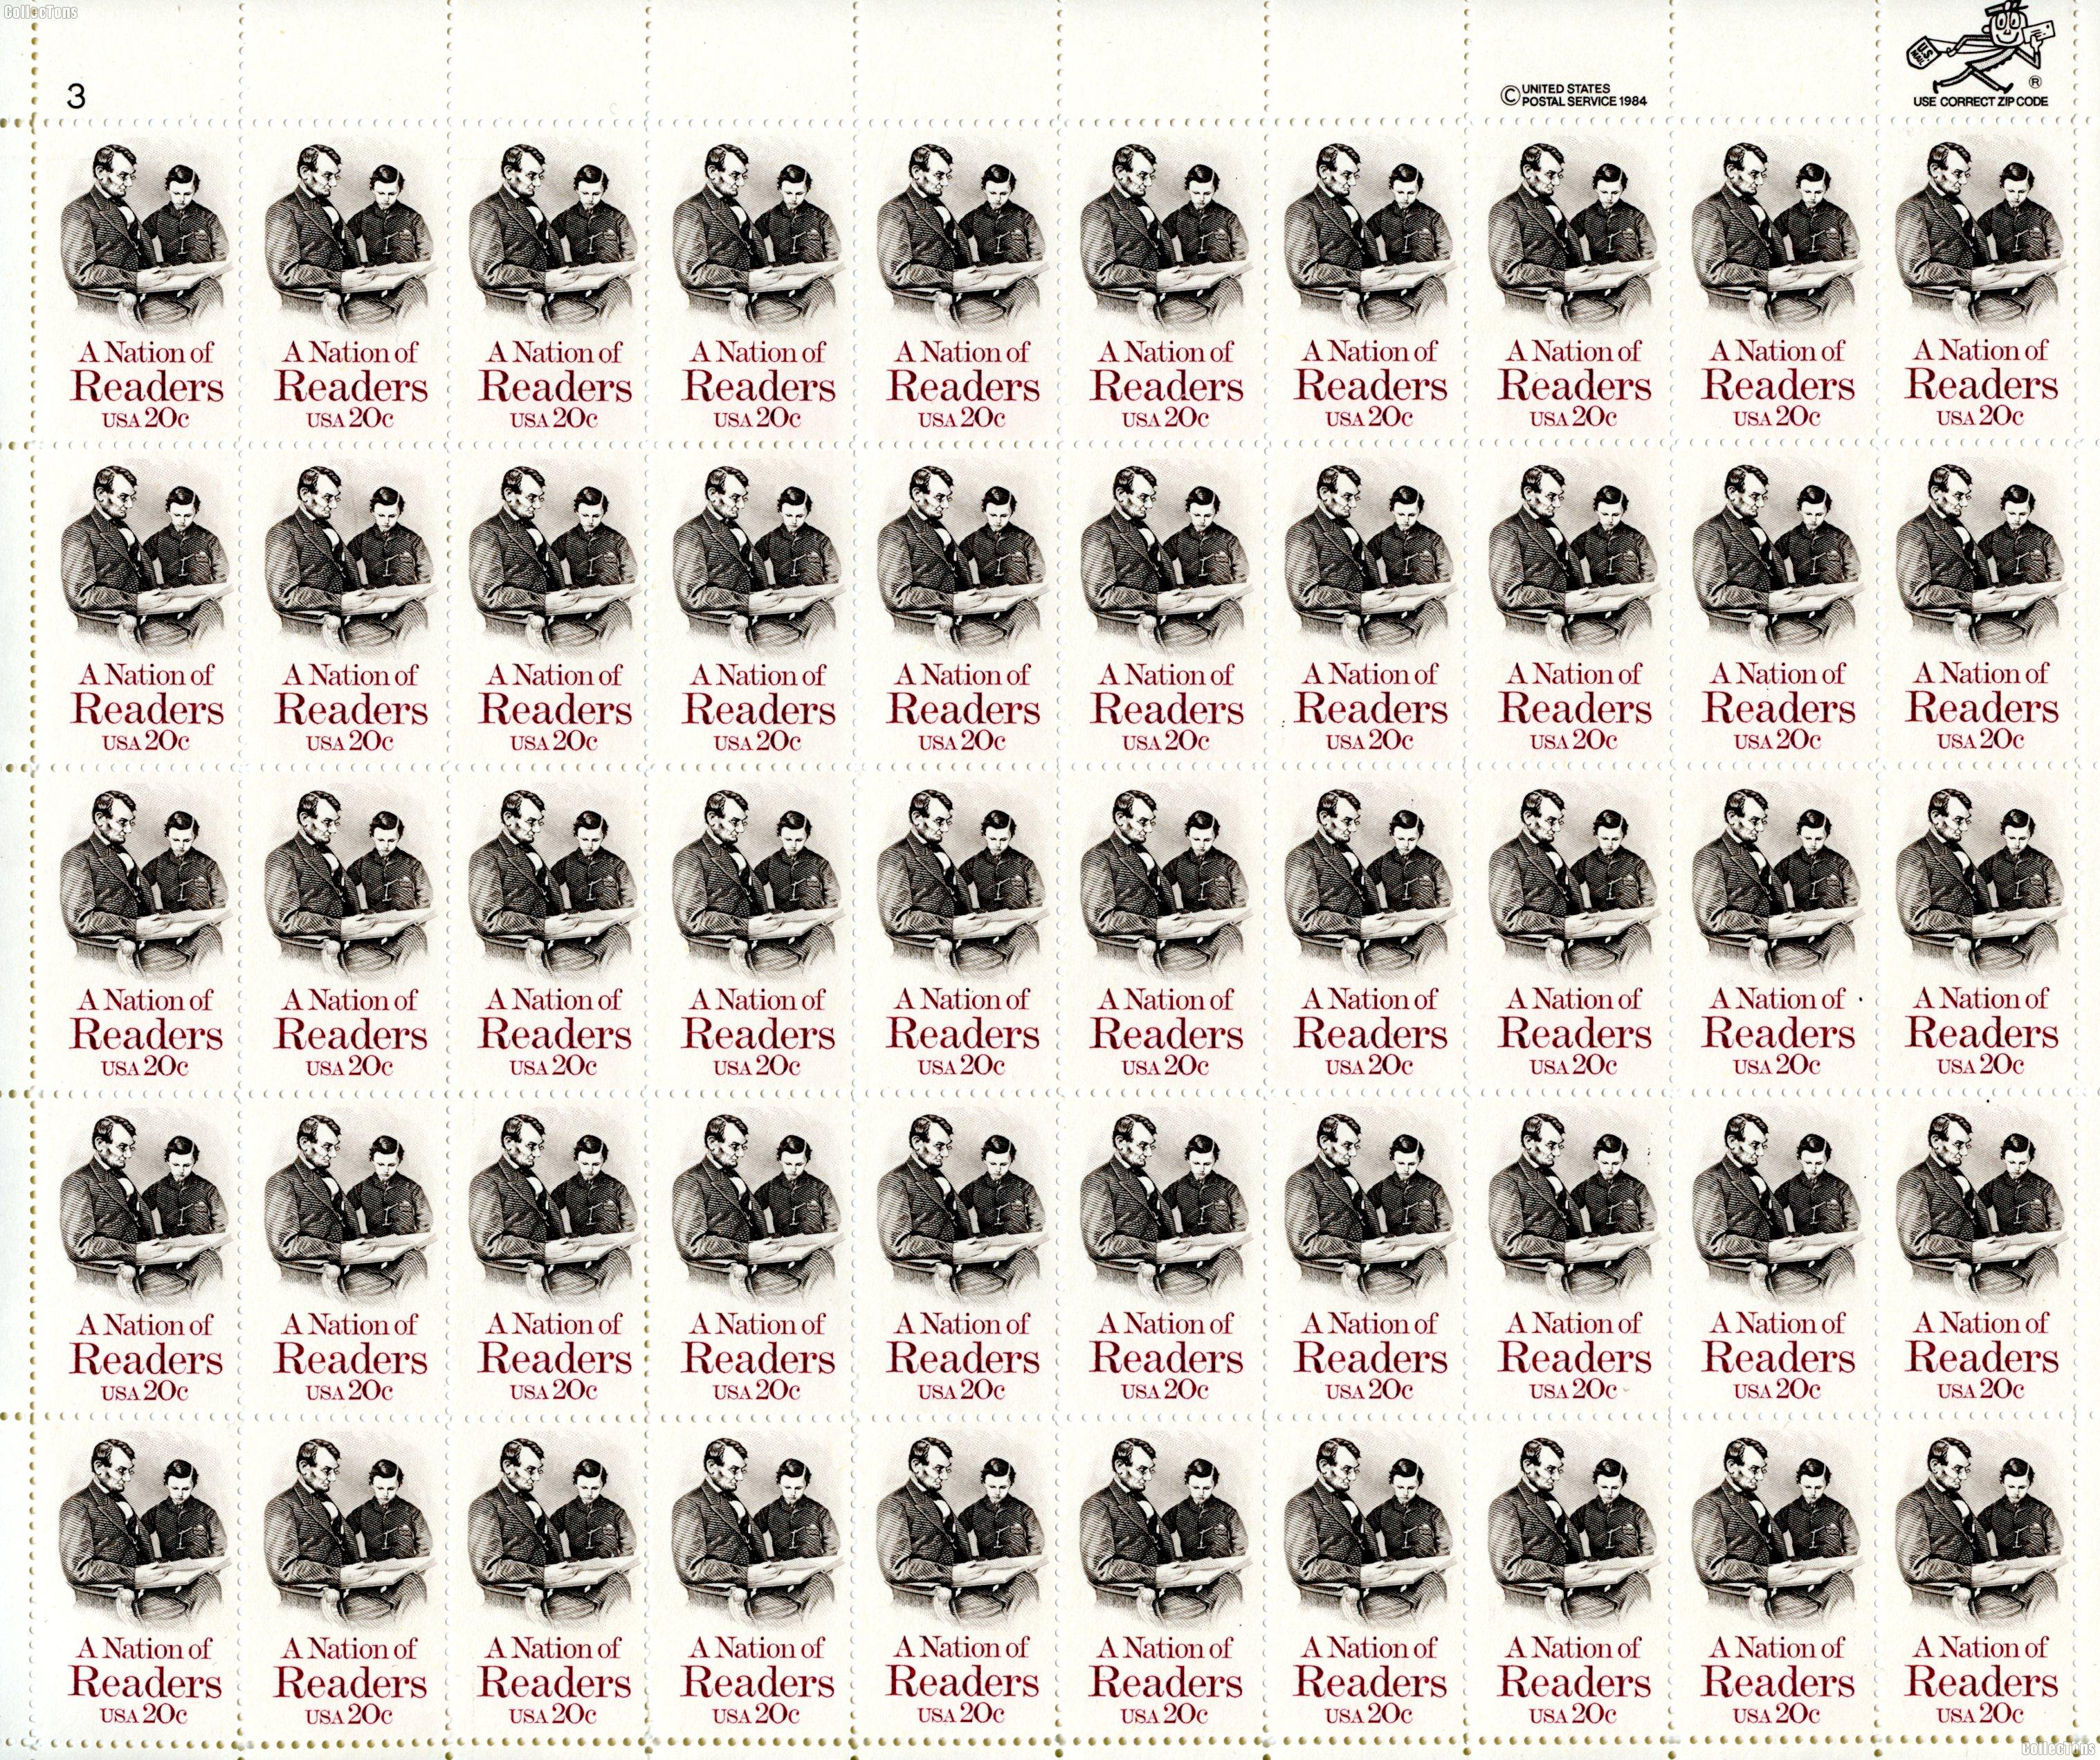 1984 A Nation of Readers 20 Cent US Postage Stamp MNH Sheet of 50 Scott #2106